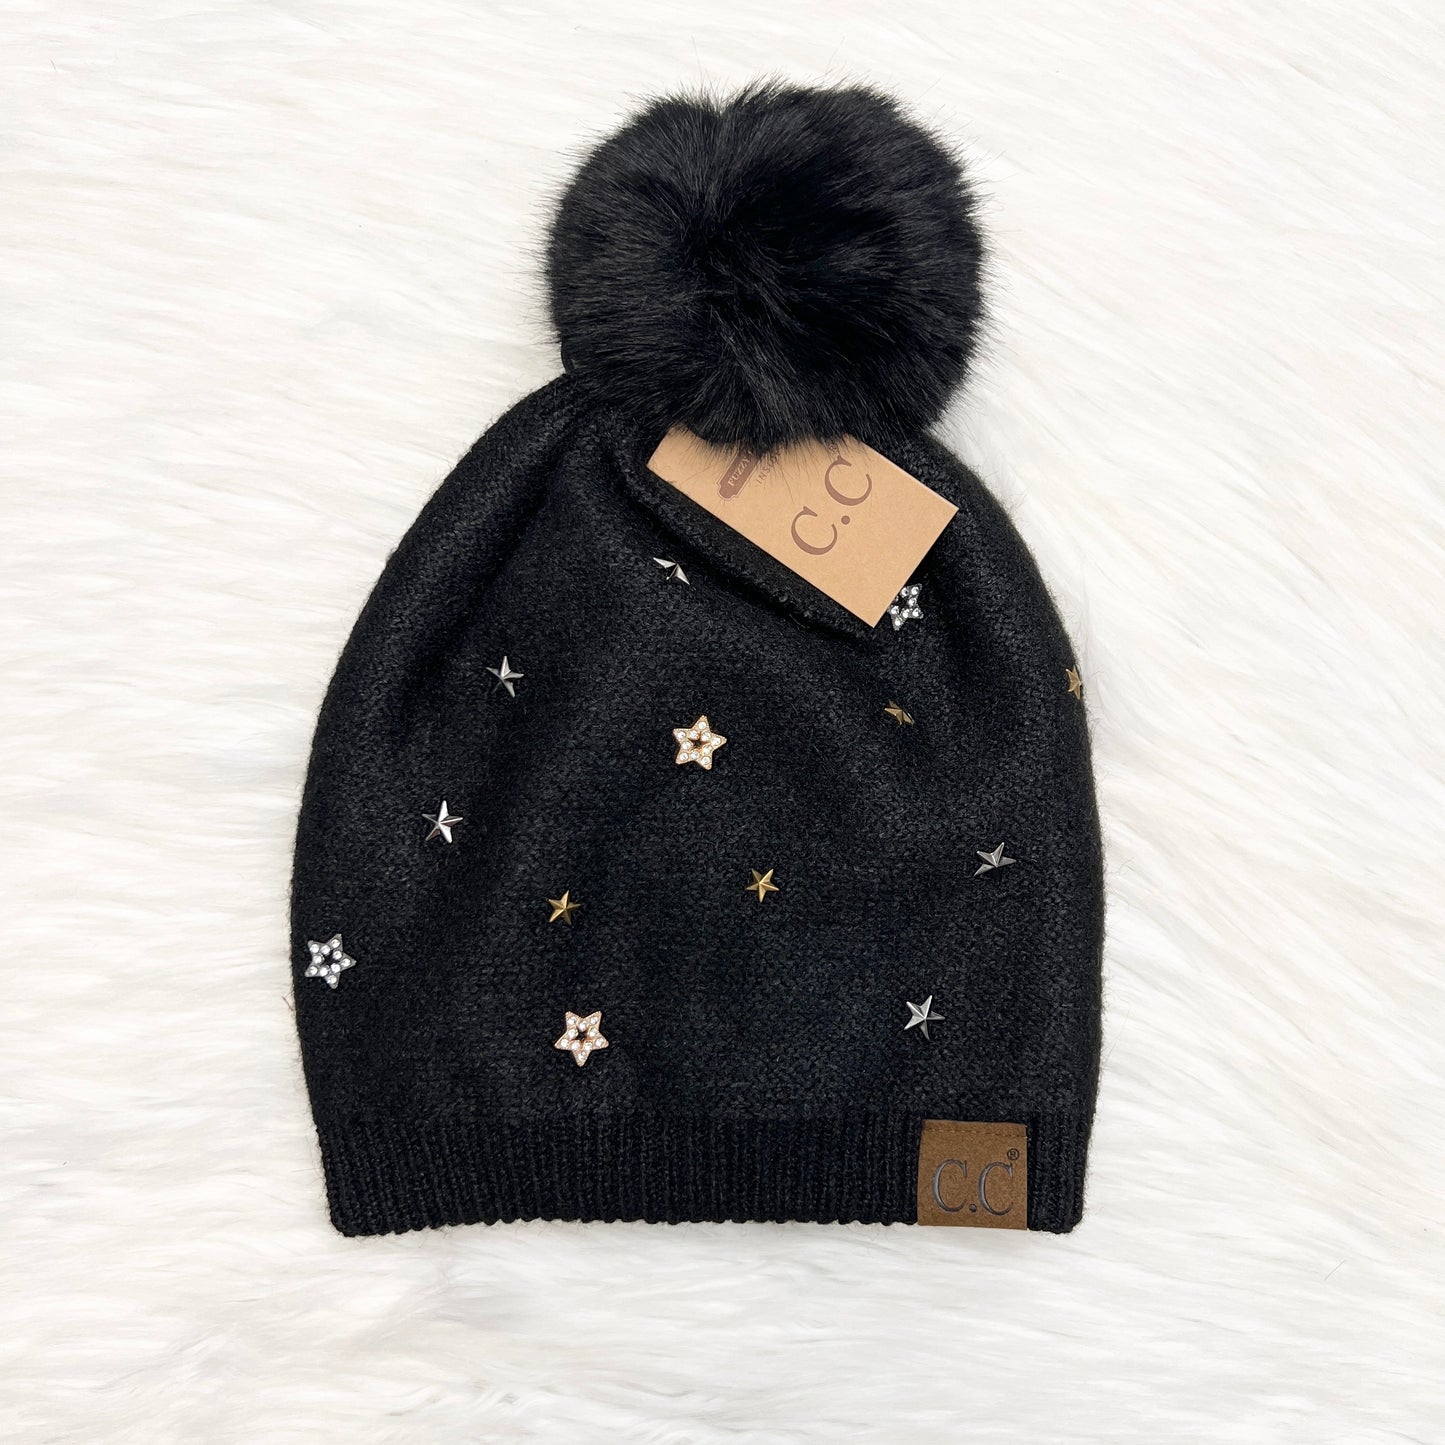 C.C Studded Star Pom Pom Beanie for Adults, Winter Hats, Premium Hats, Warm Hats, Winter Accessories, Hair Accessories